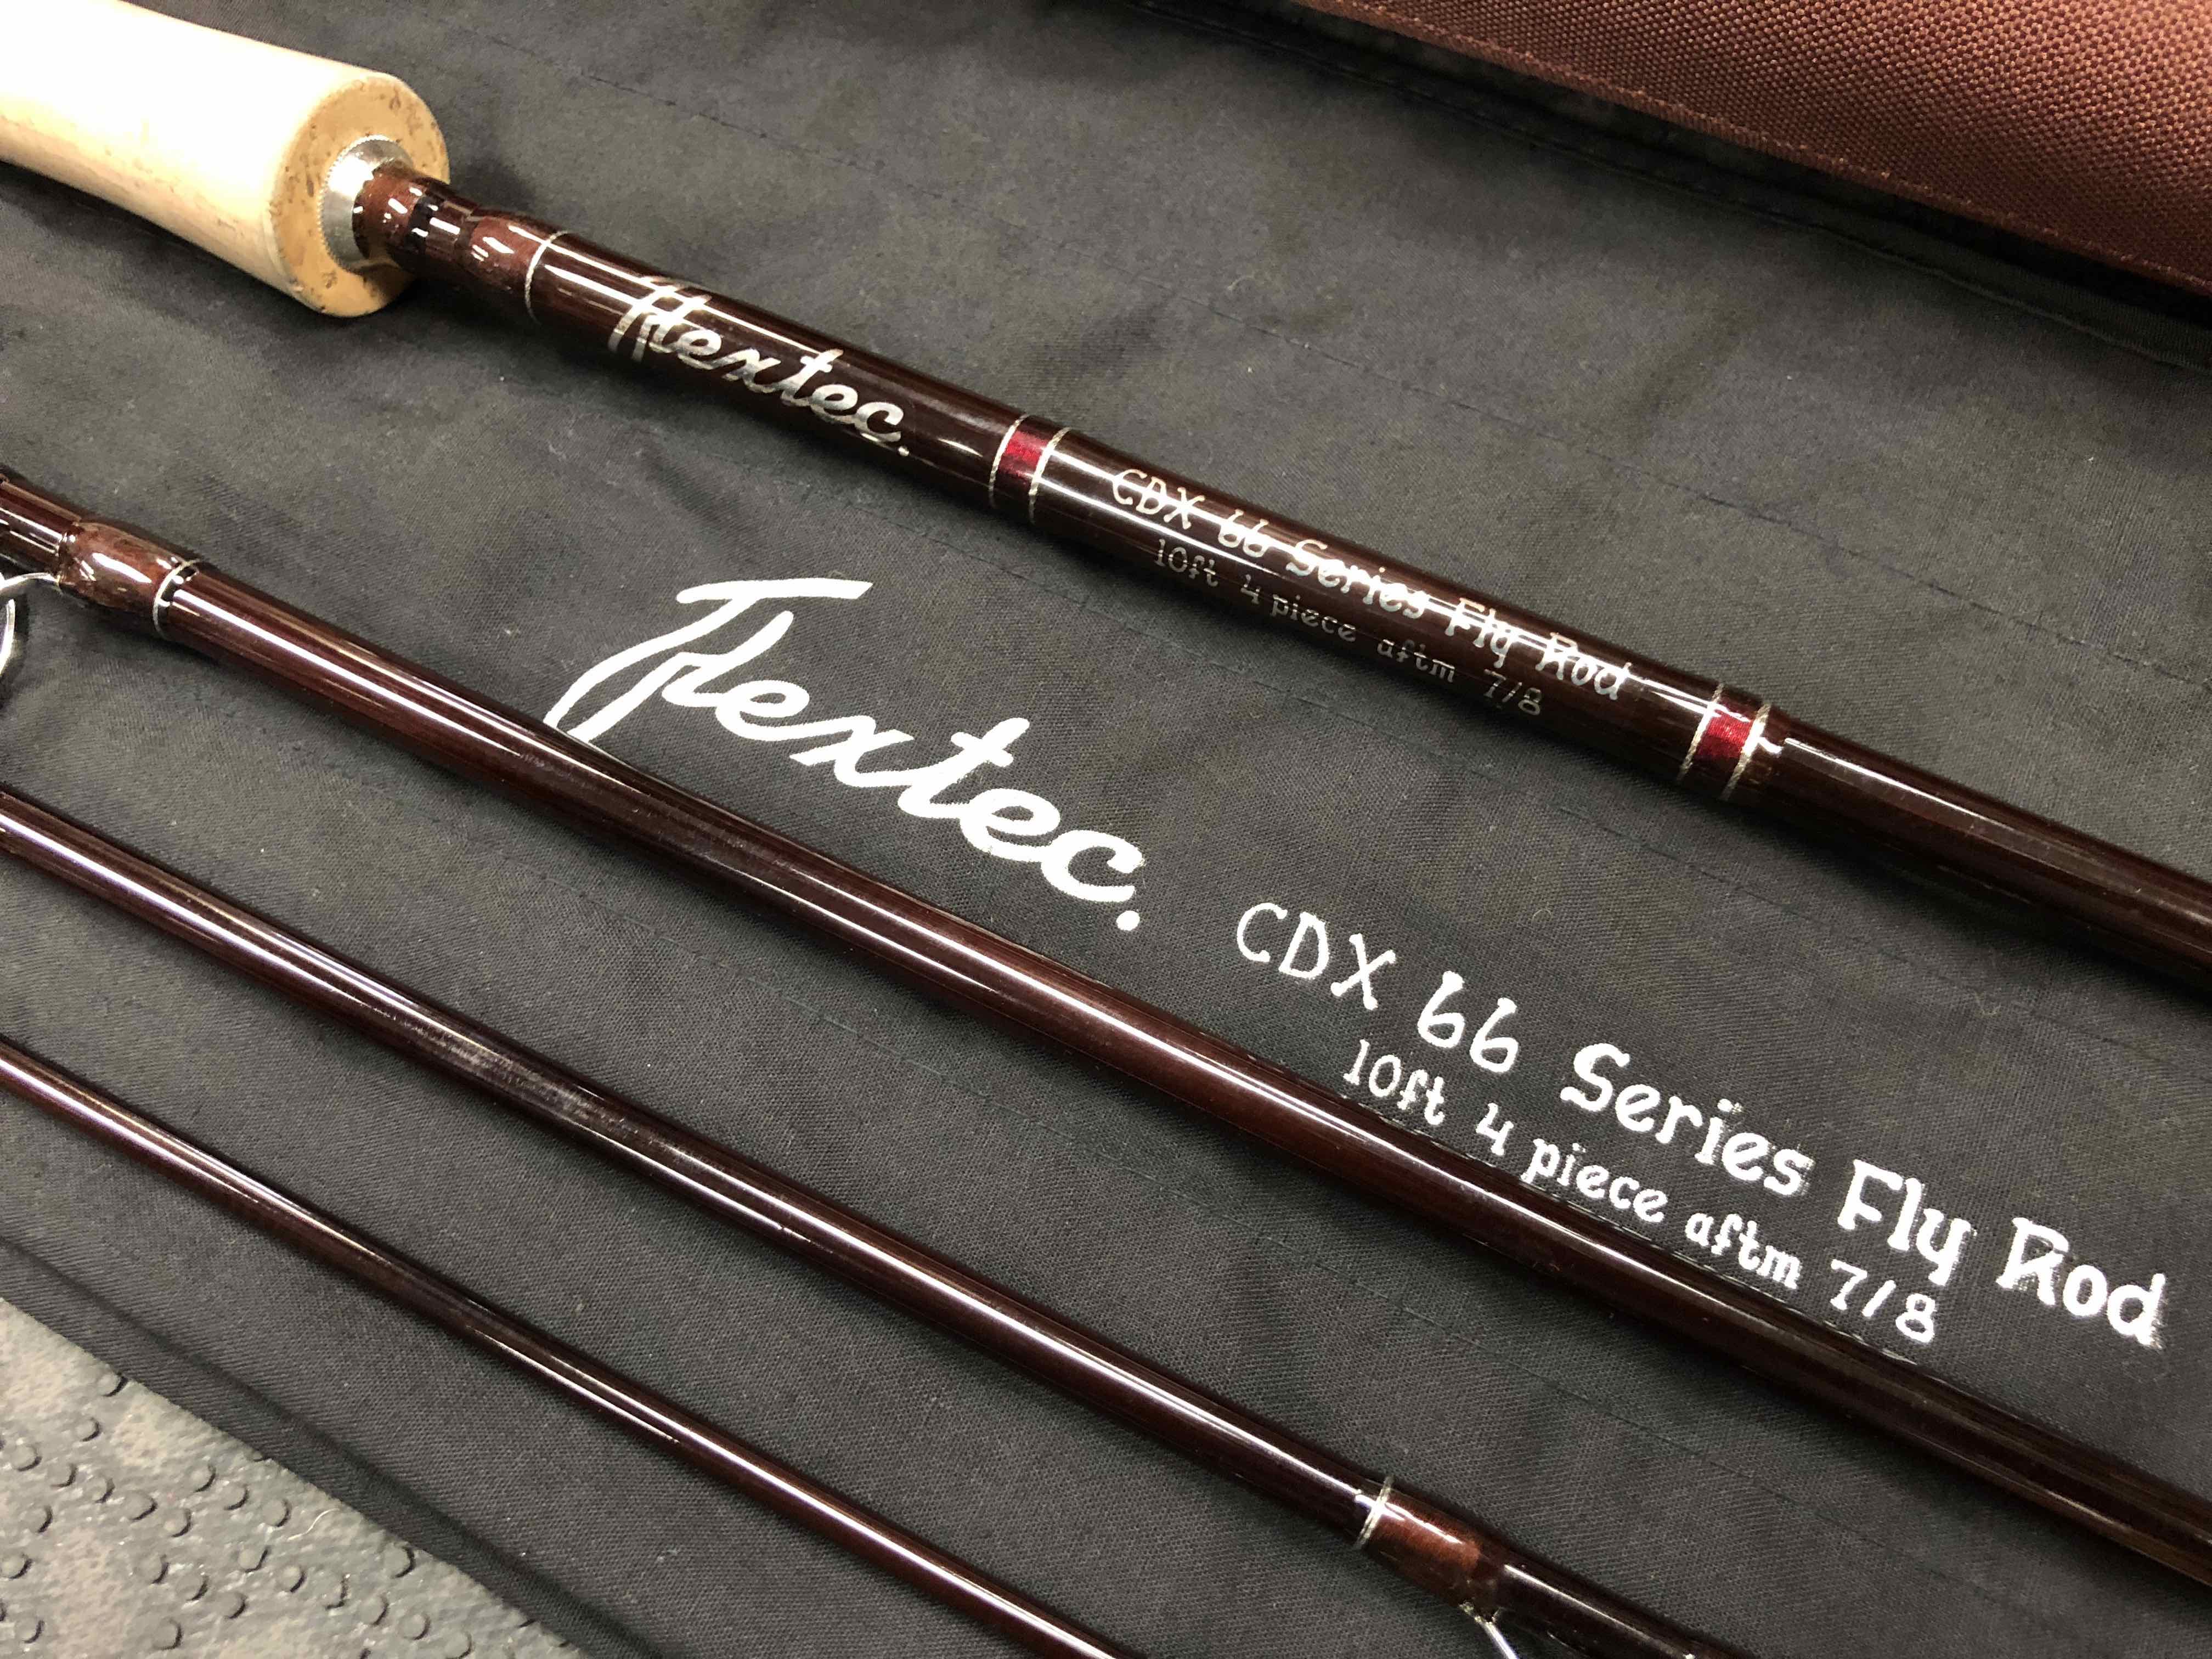 Flextec CDX 66 Series Fly Rod - 4pc 10’ 7/8Wt c/w Flextec Large Arbour Fly Reel, Spare Spool & Fly Line - LIKE NEW! - $100